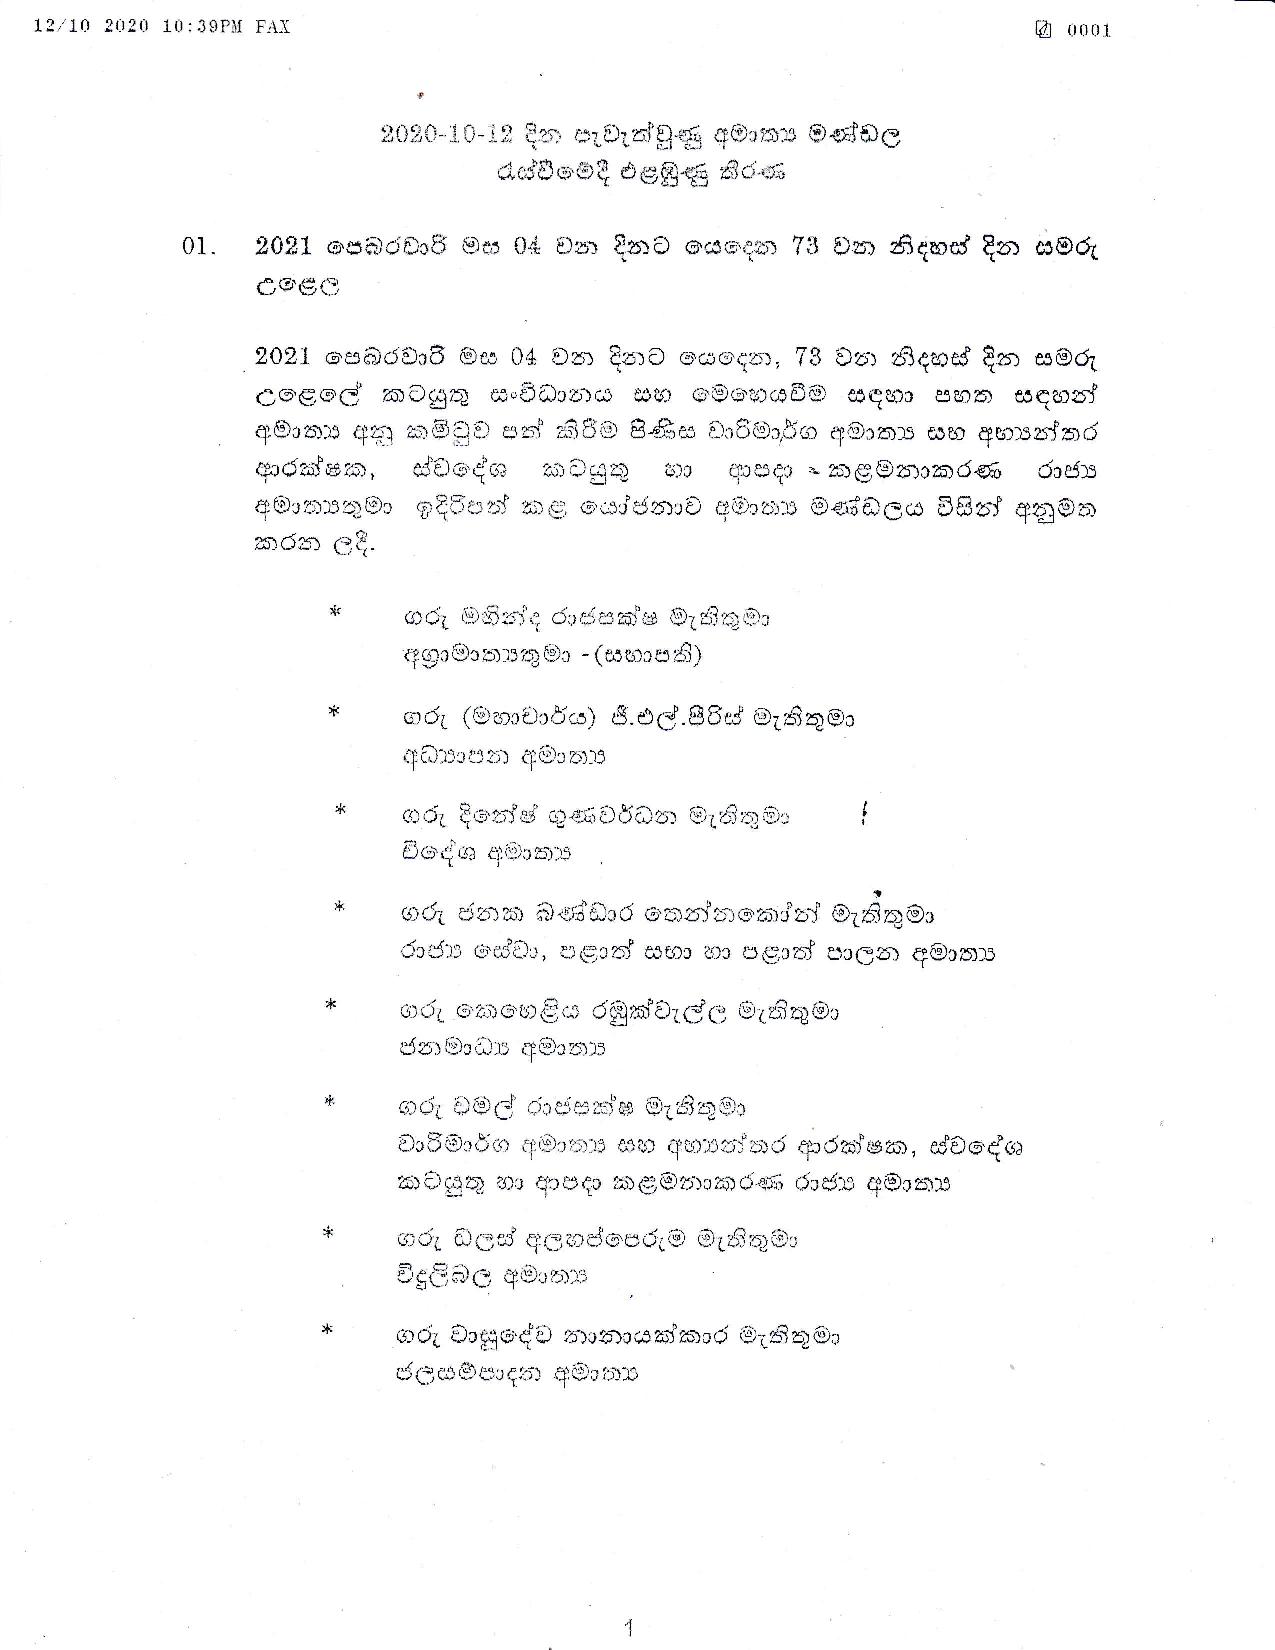 Cabinet Decision on 12.10.2020 page 001